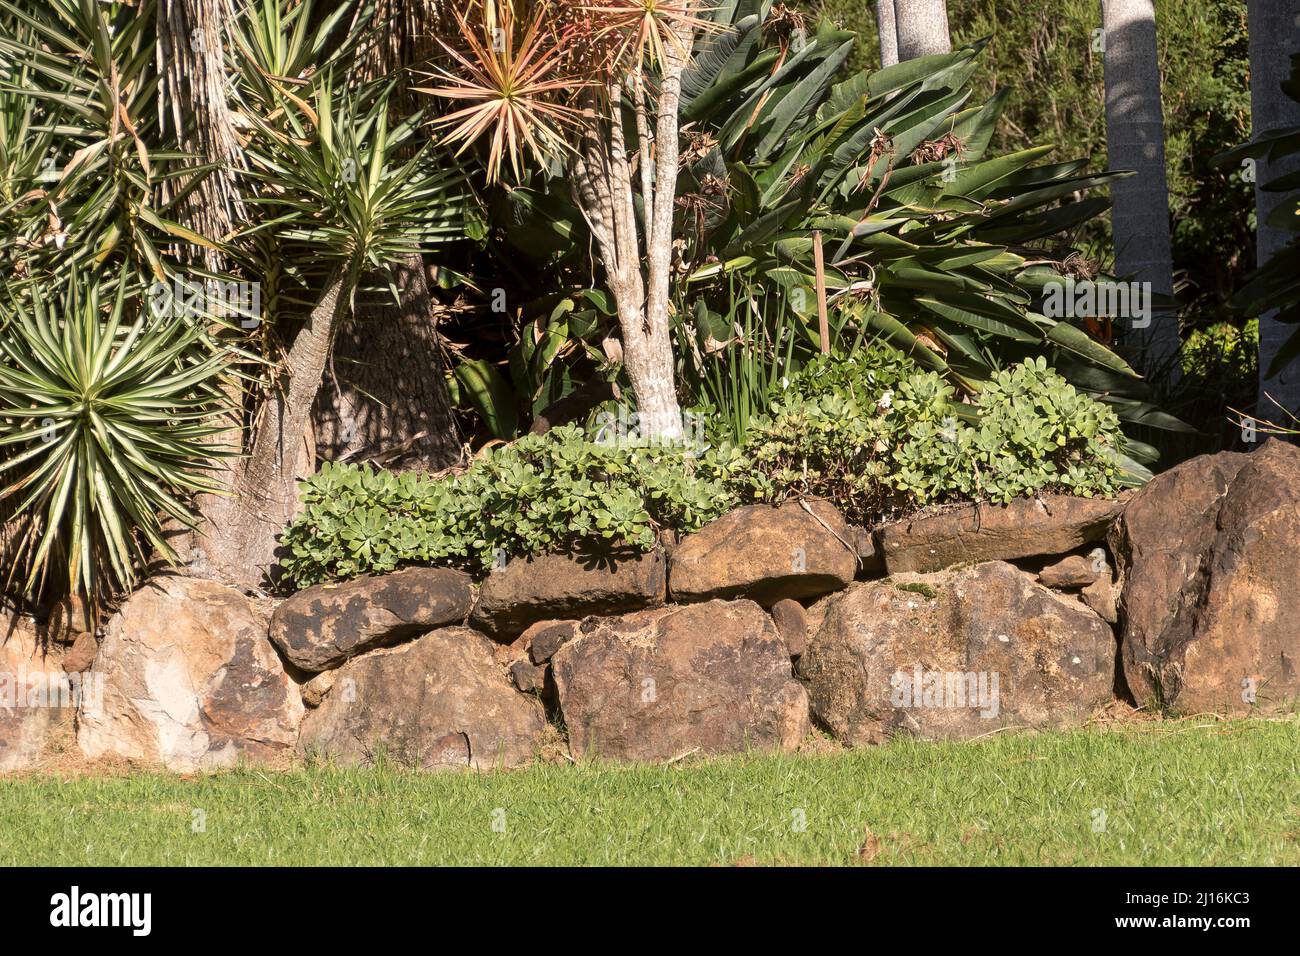 Part of basalt rock retaining wall in private garden, in Queensland, Australia, topped with pale green succulents and Dracaena marginata, Dragon trees Stock Photo